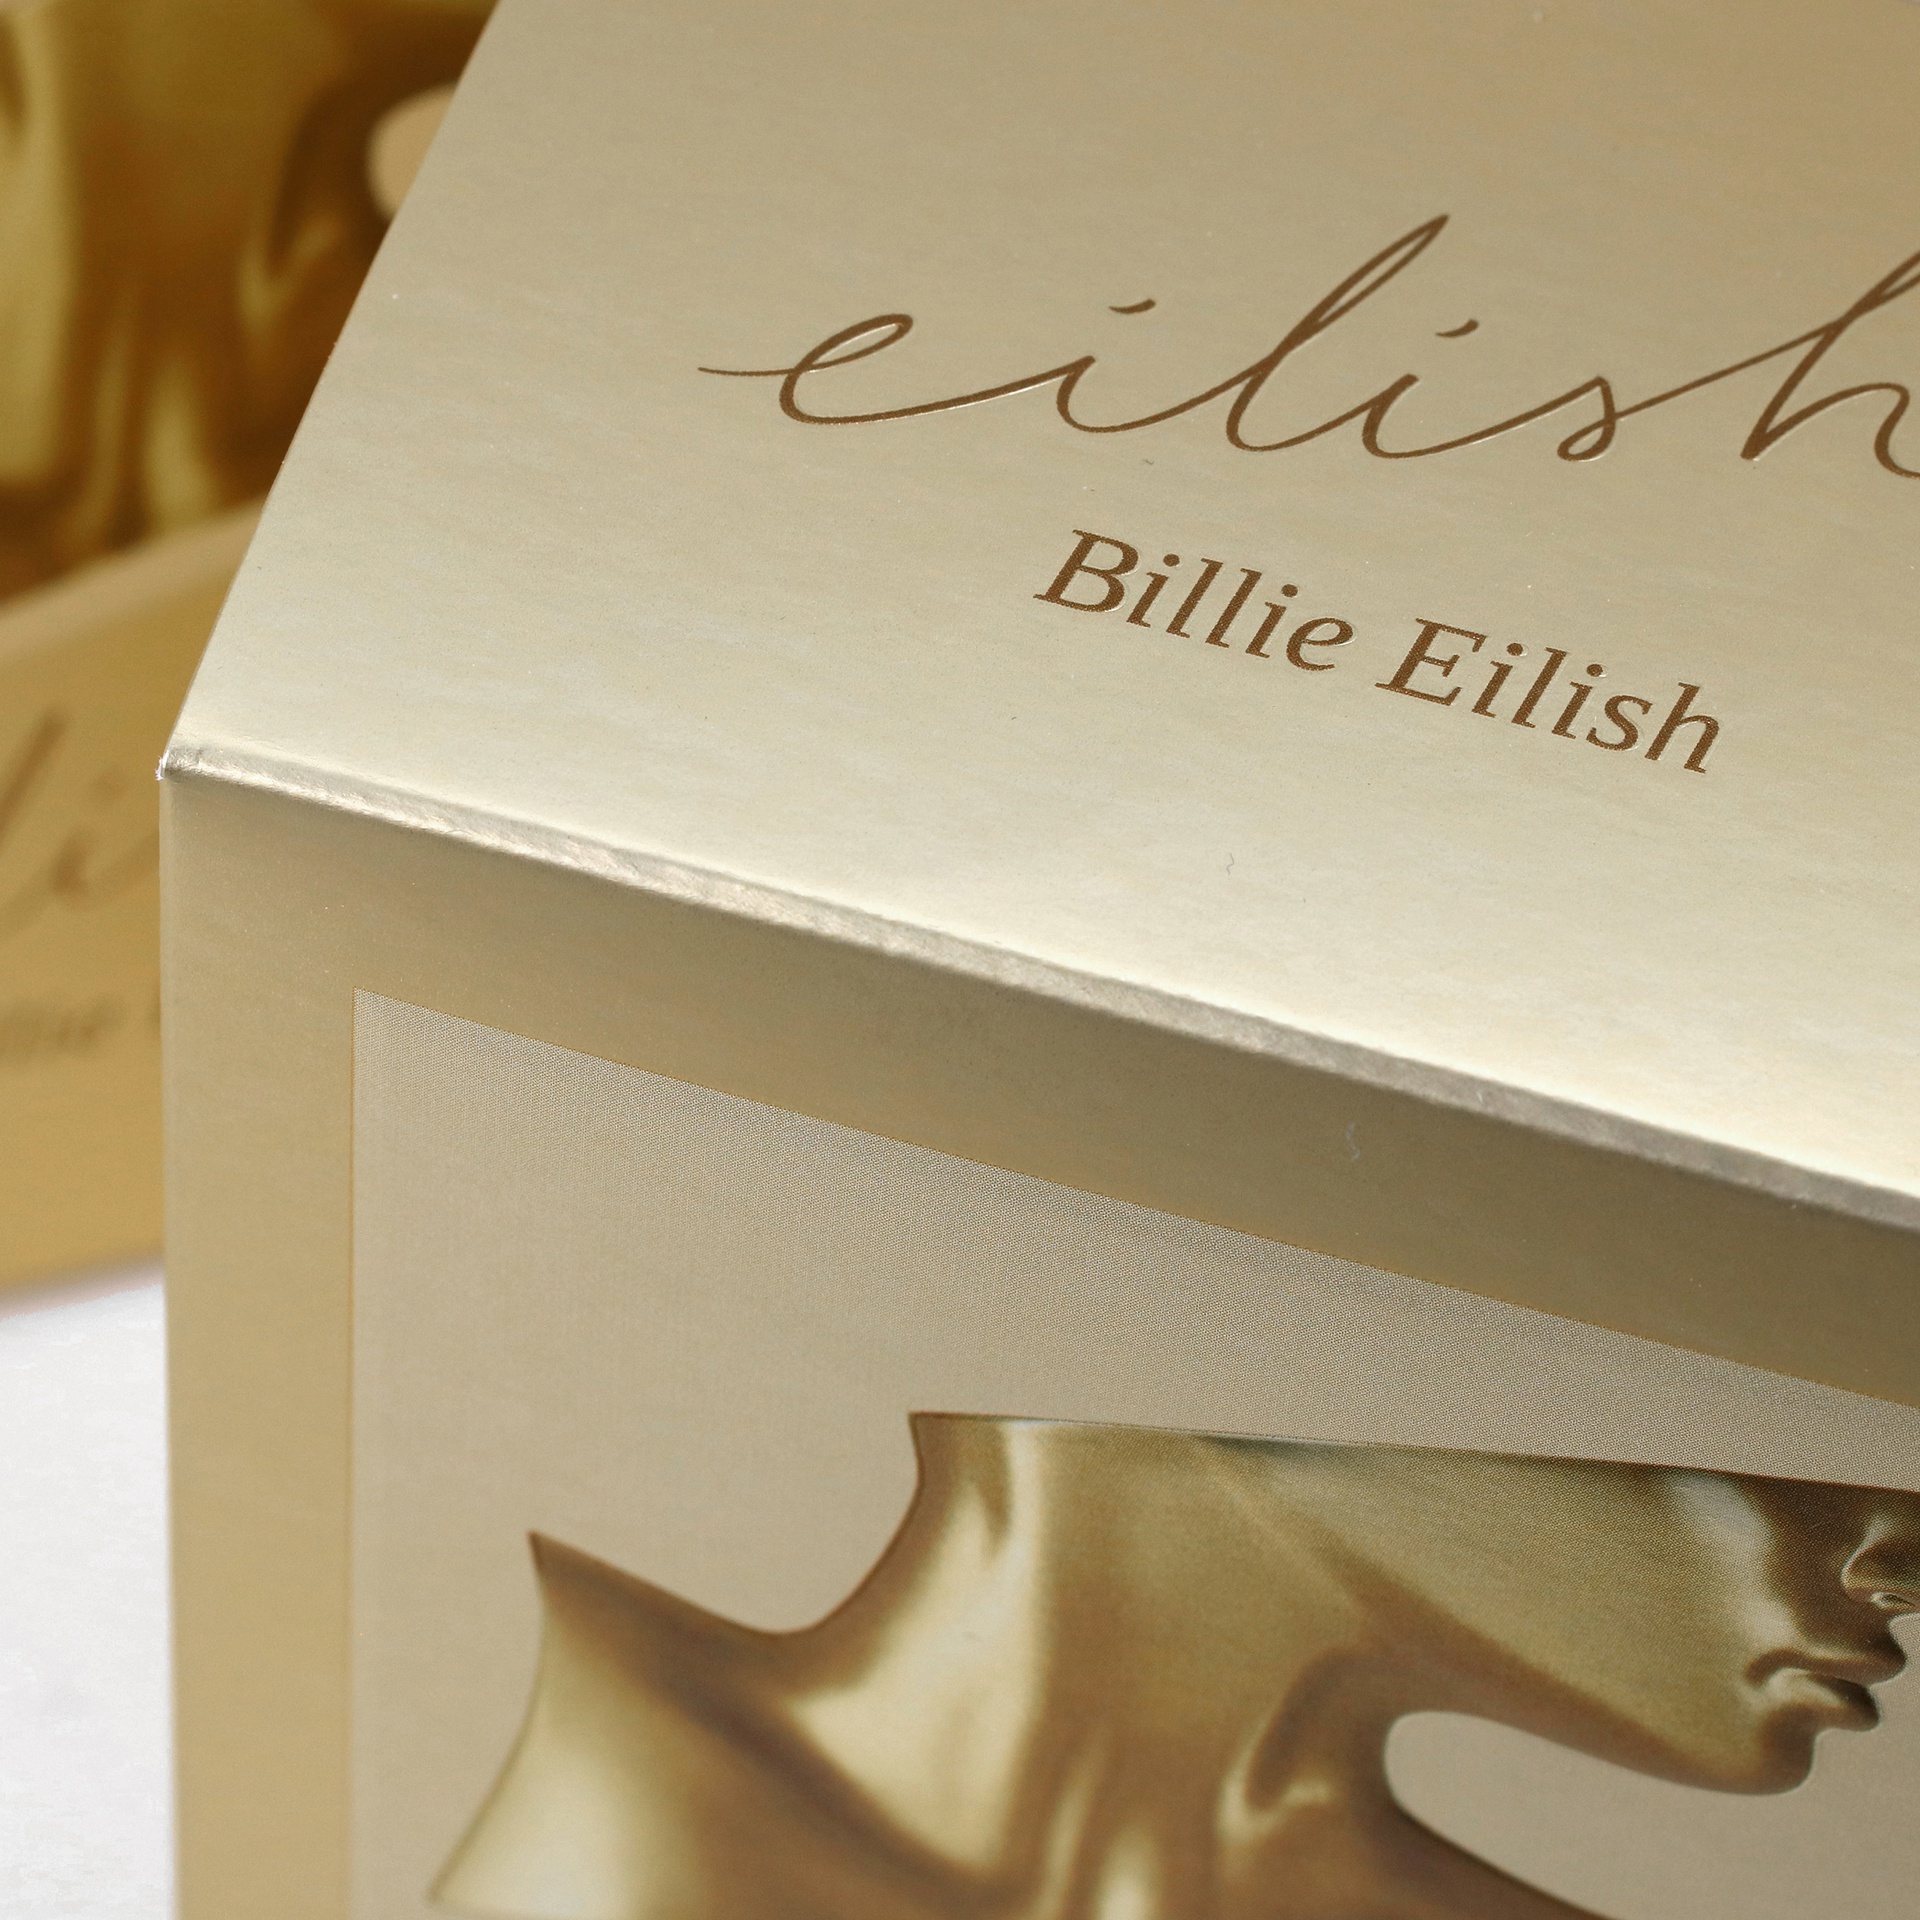 Billie Eilish packaging delivers a multisensory product experience through unusual visual depth and haptic effects.